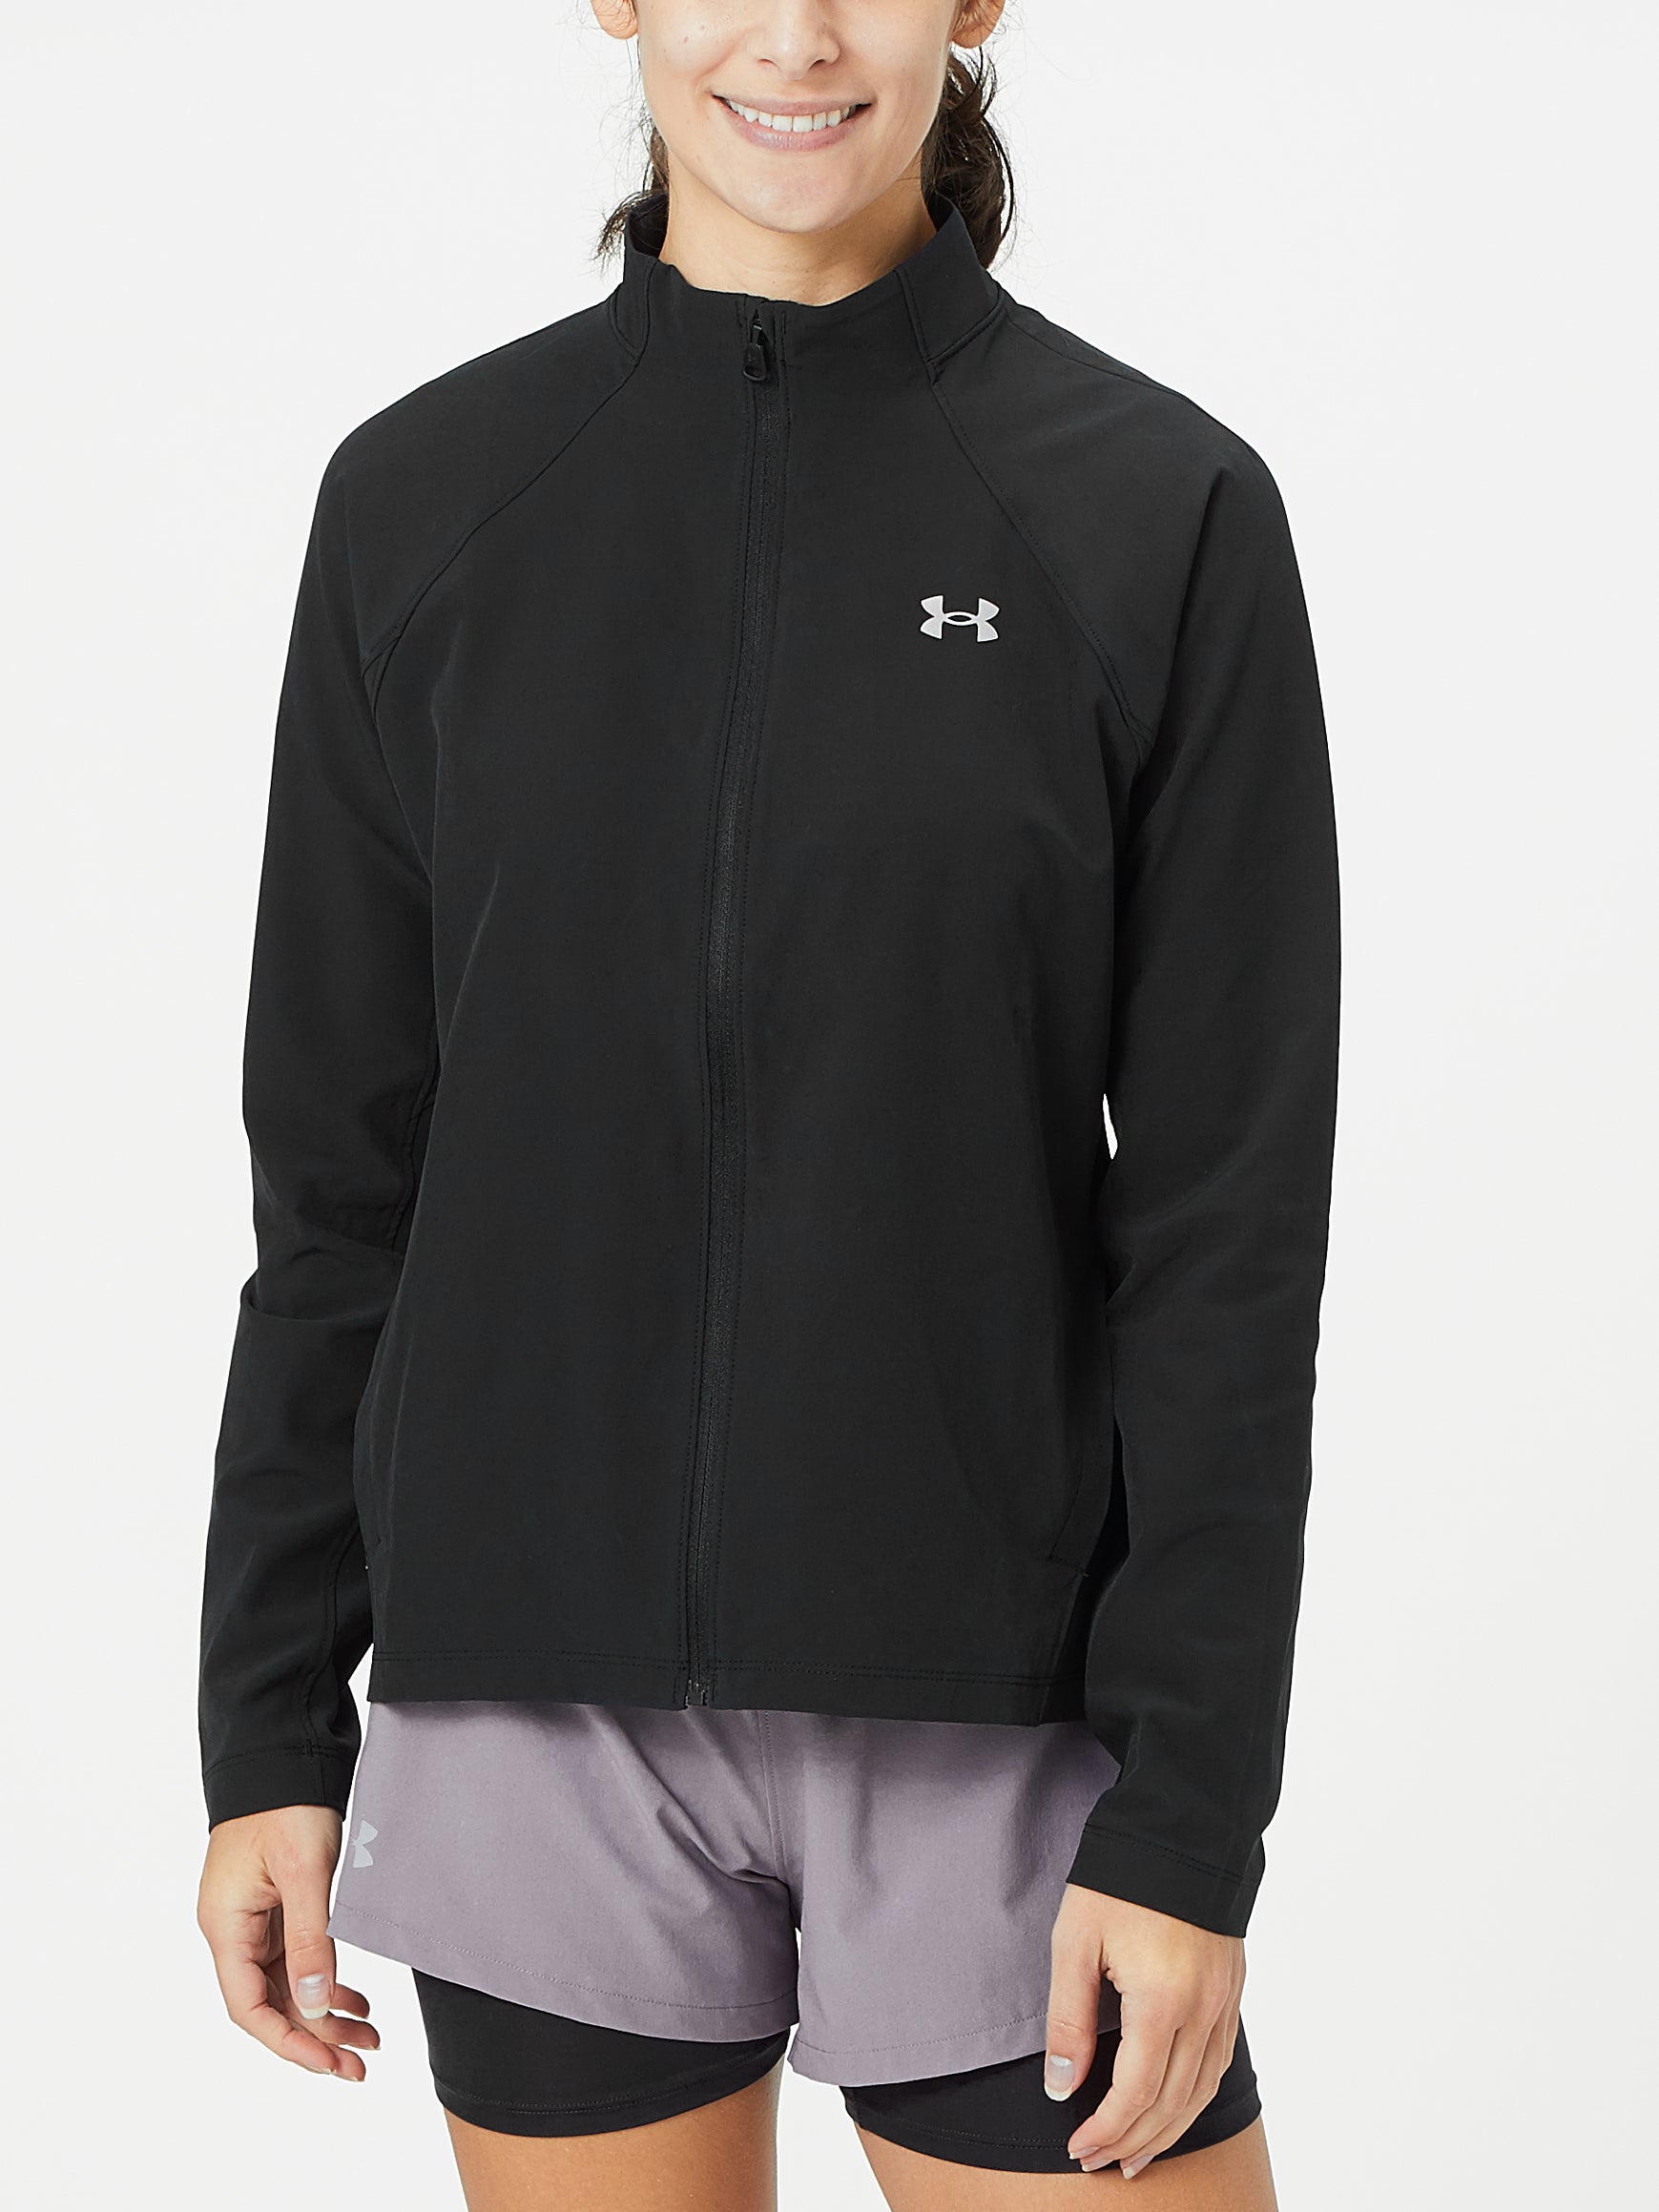 /Reflective 001 Black Small Under Armour Womens Launch 3.0 Storm Jacket 